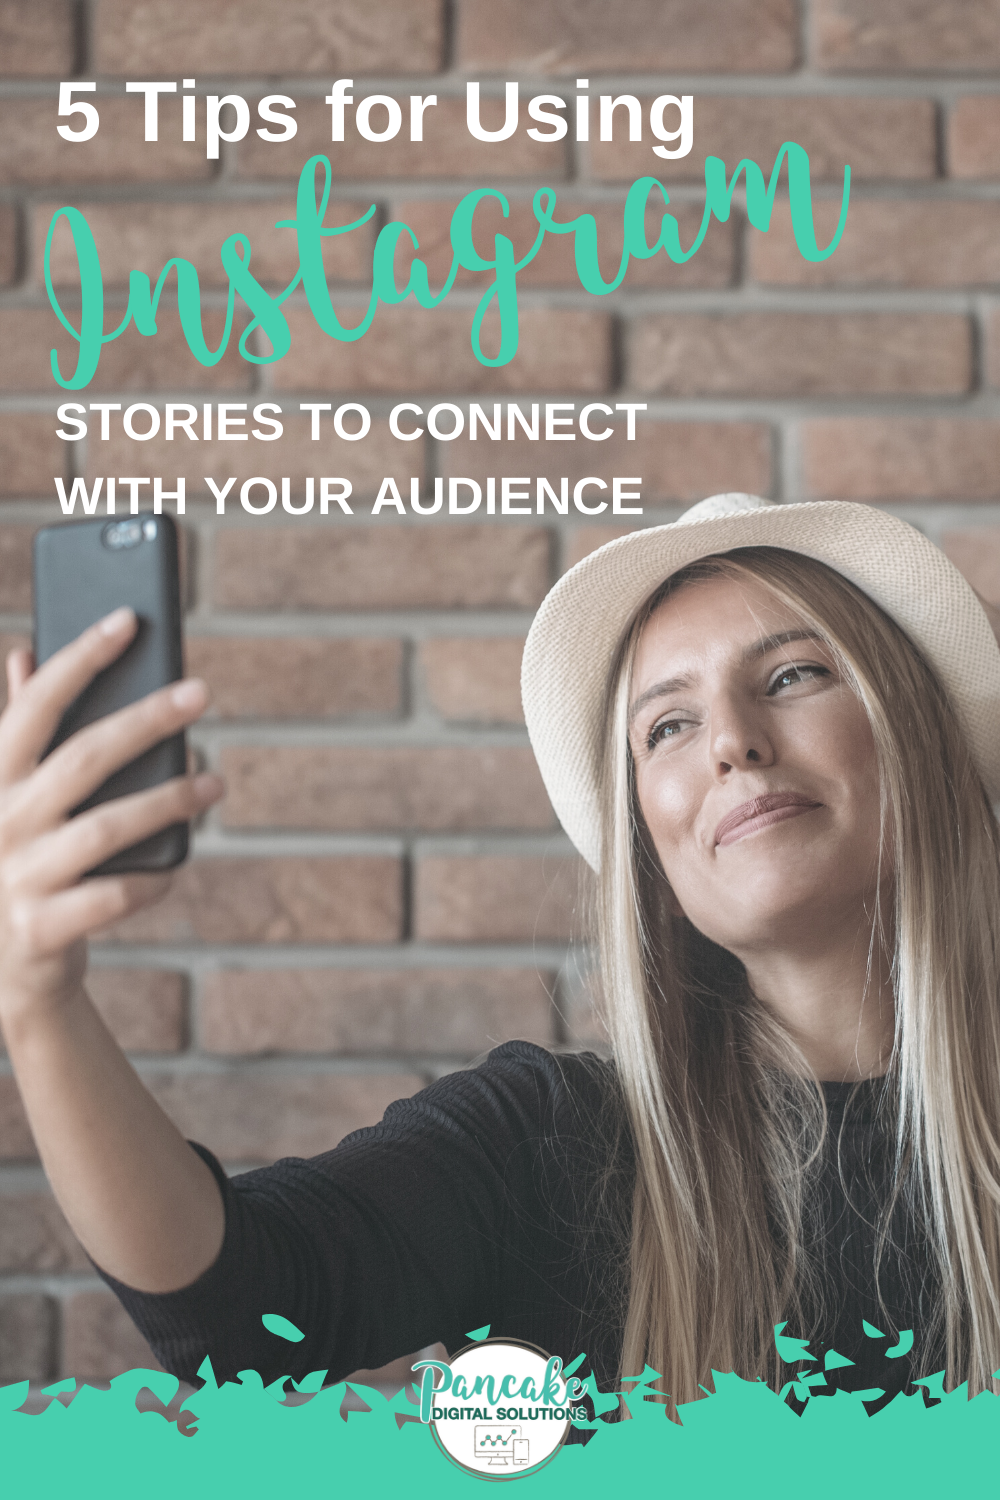 5 Tips for Using Instagram Stories to Connect with Your Audience